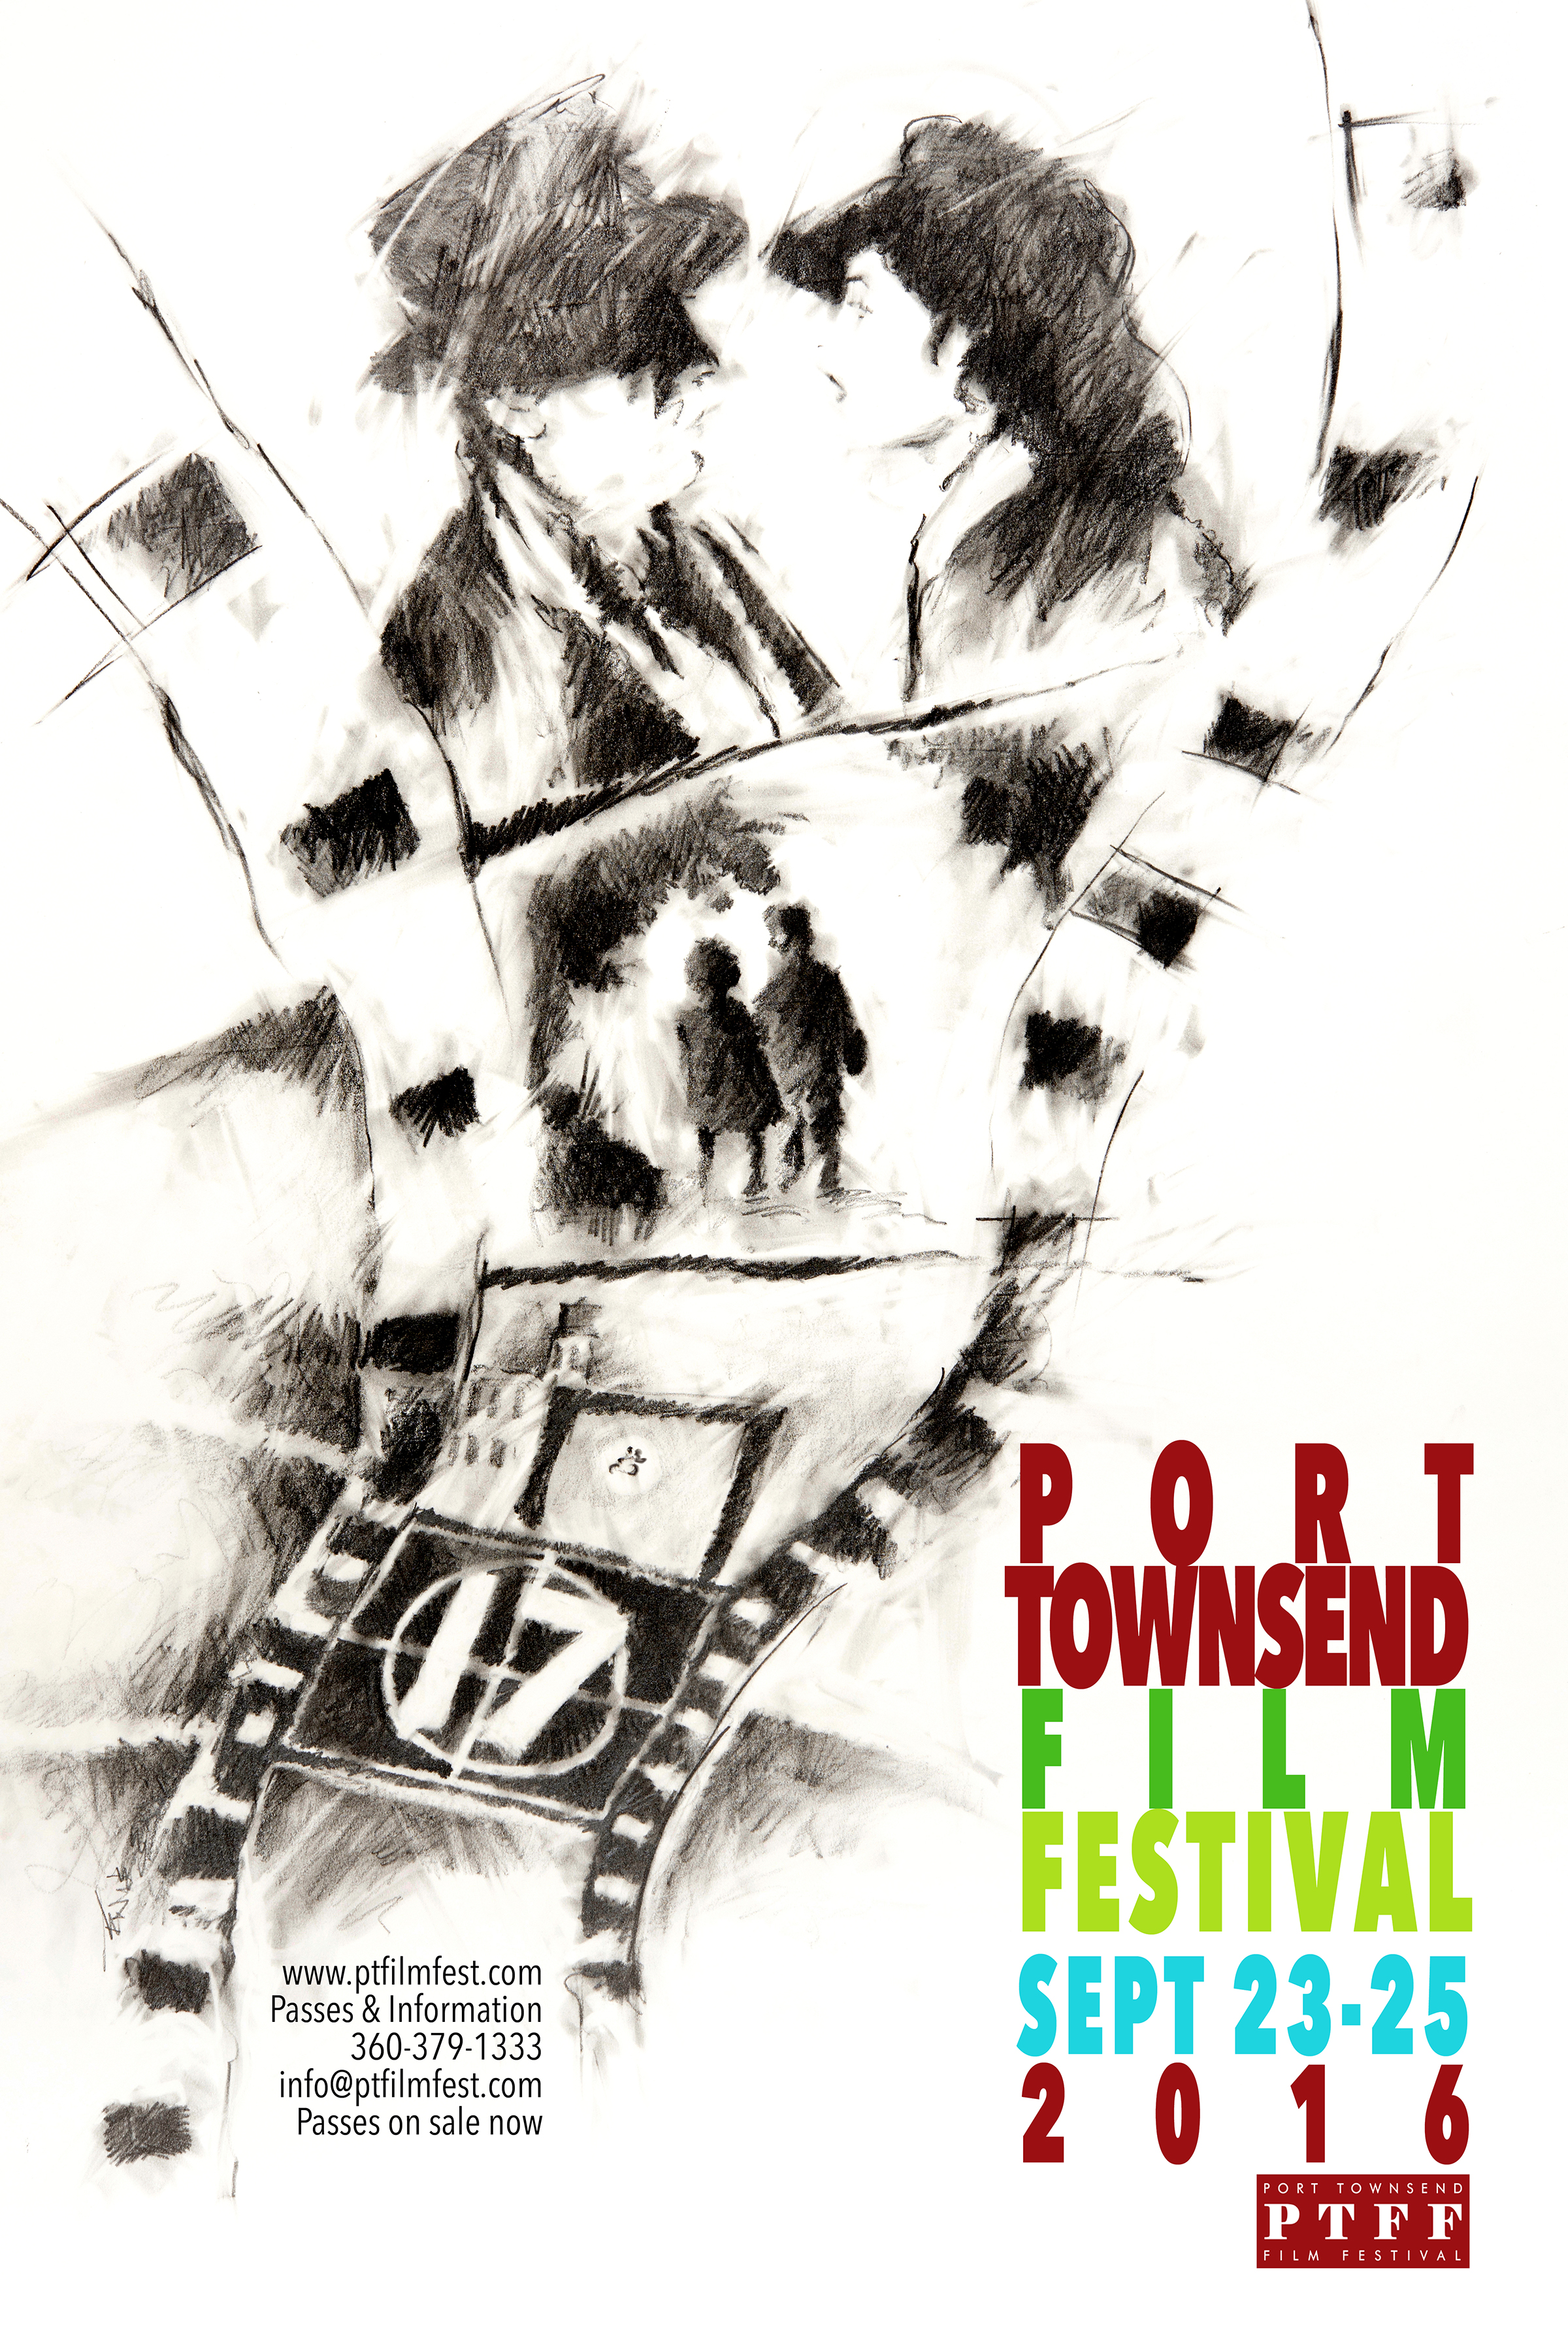 The 2016 Port Townsend Film Festival poster designed by Terry Tennesen will be formally unveiled at a public event tonight. ()